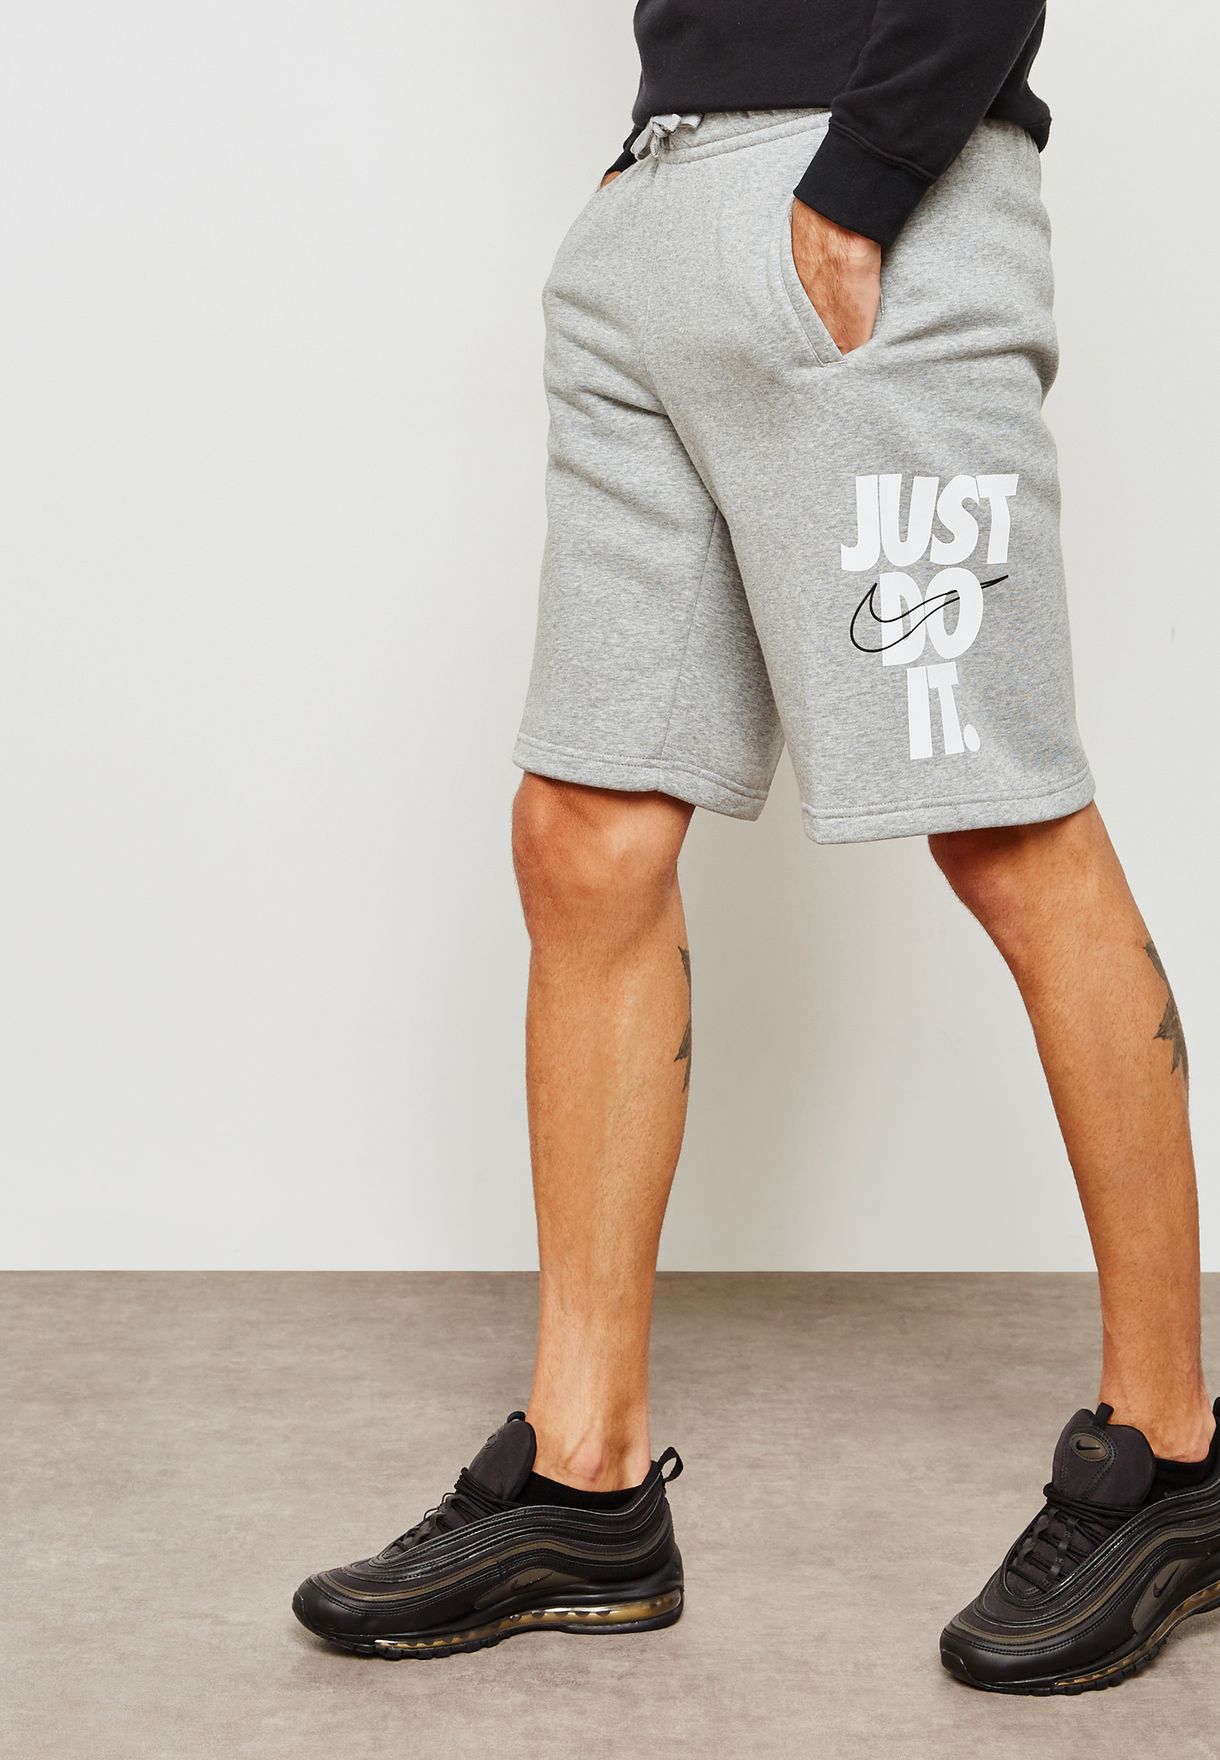 just do it shorts